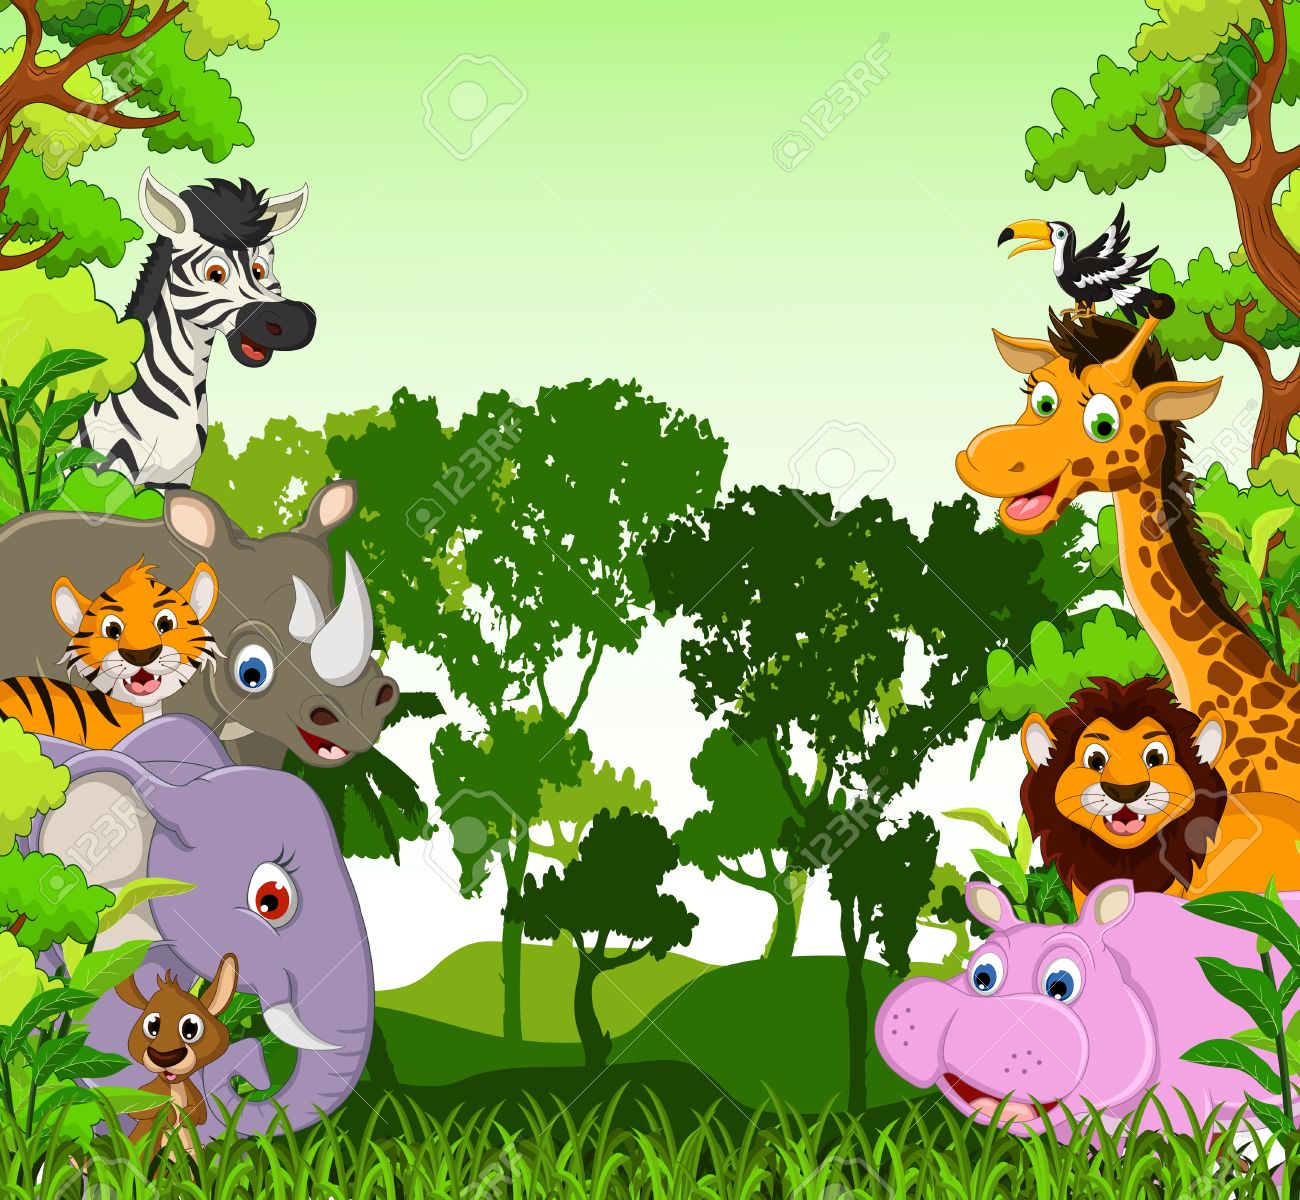 Free Animal Backgrounds Cliparts, Download Free Clip Art